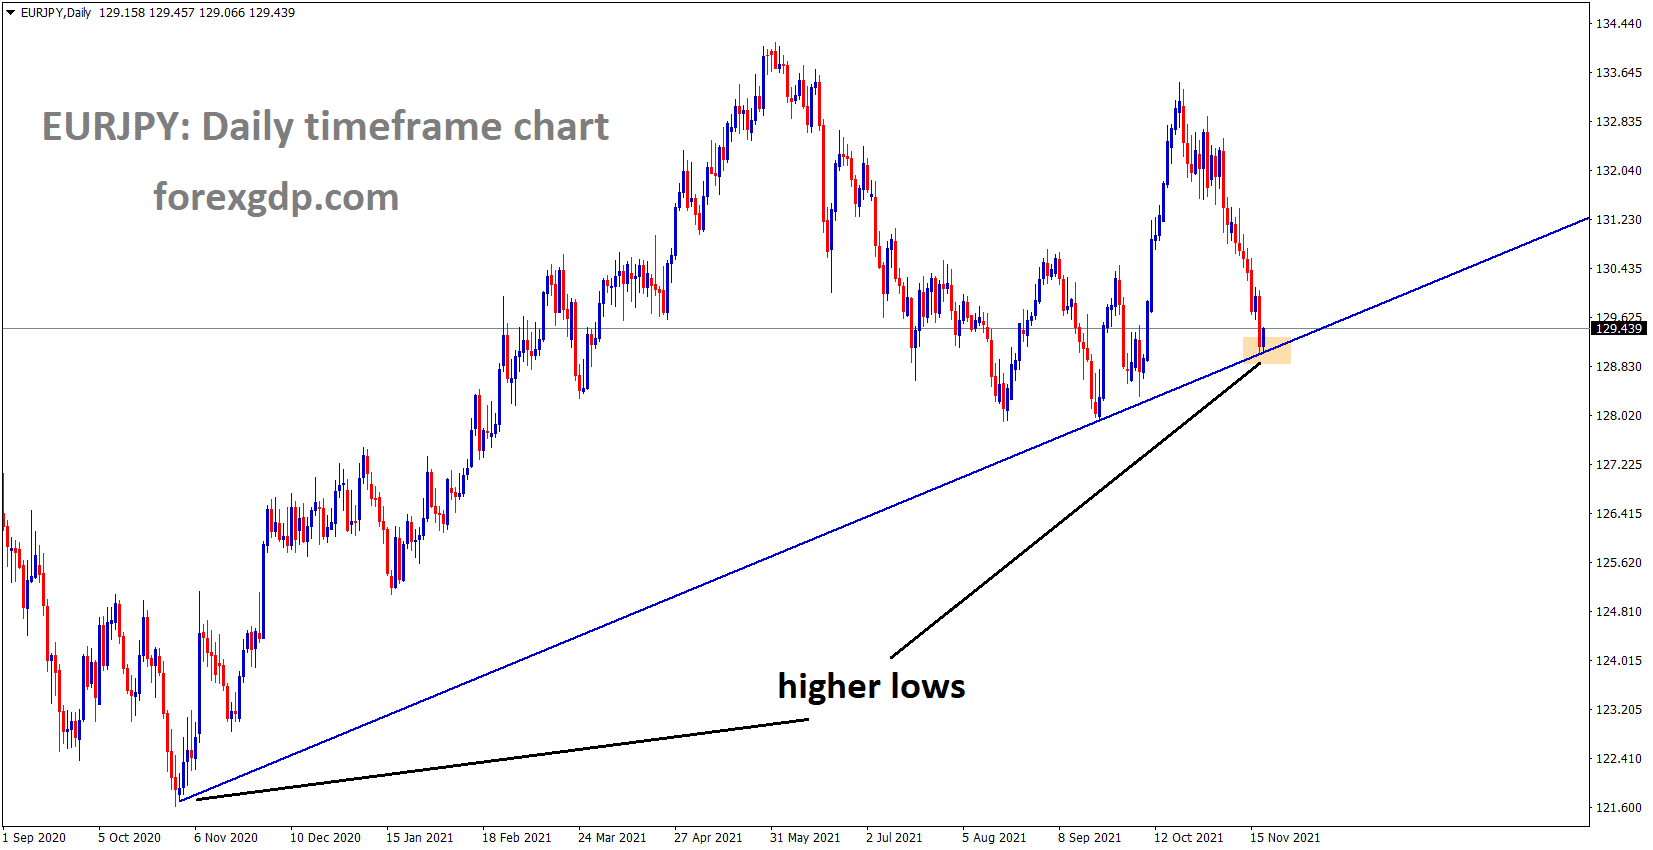 EURJPY is moving in the Bullish trendline and the market has reached the higher low area of the trendline